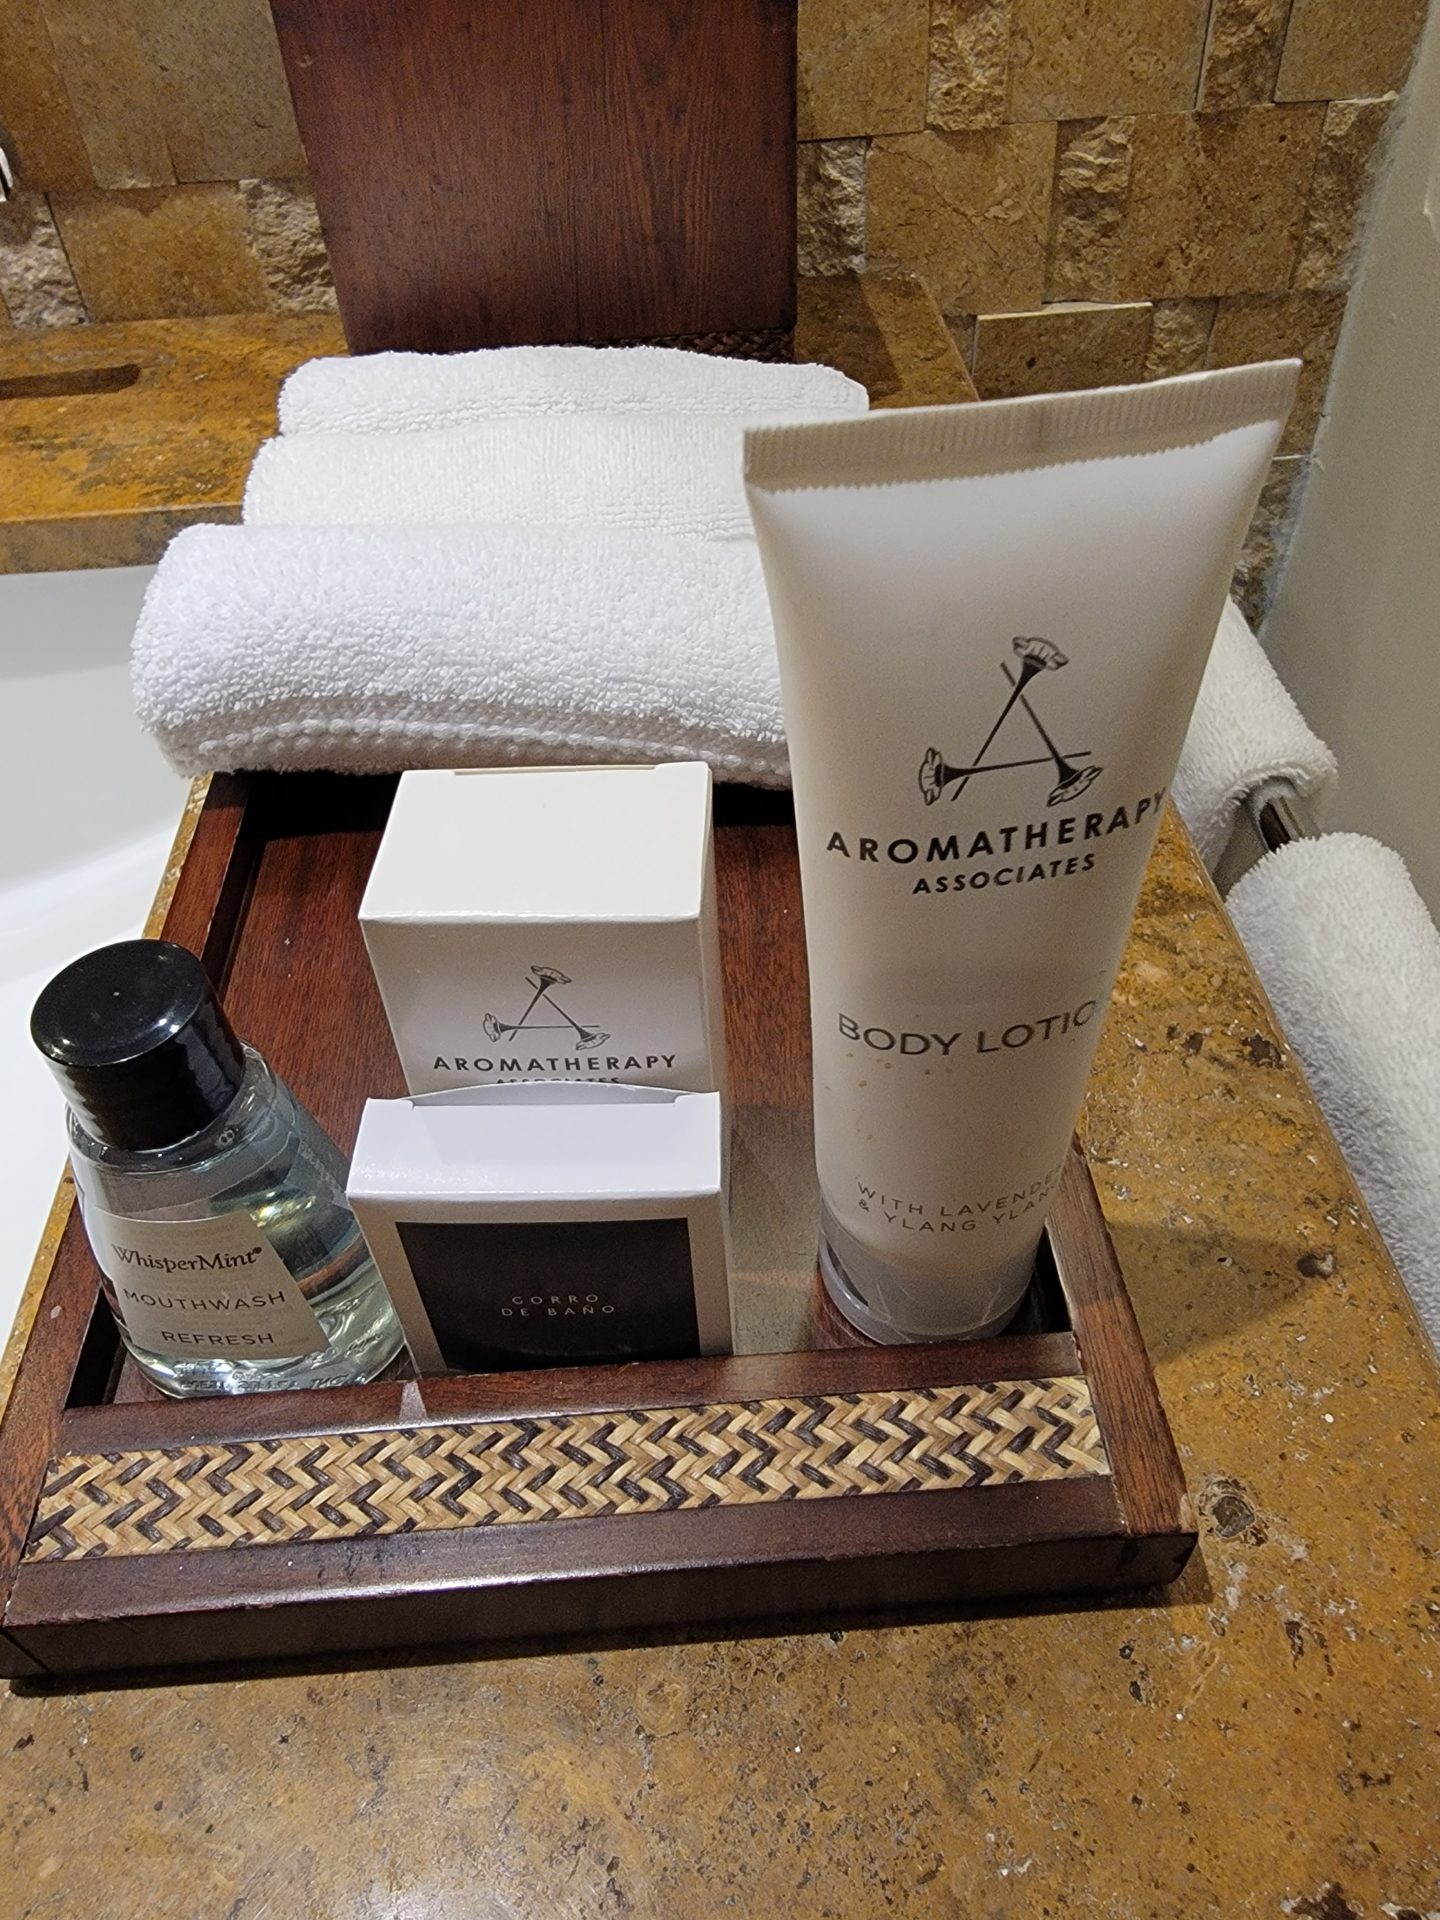 a wooden tray with a group of toiletries and towels